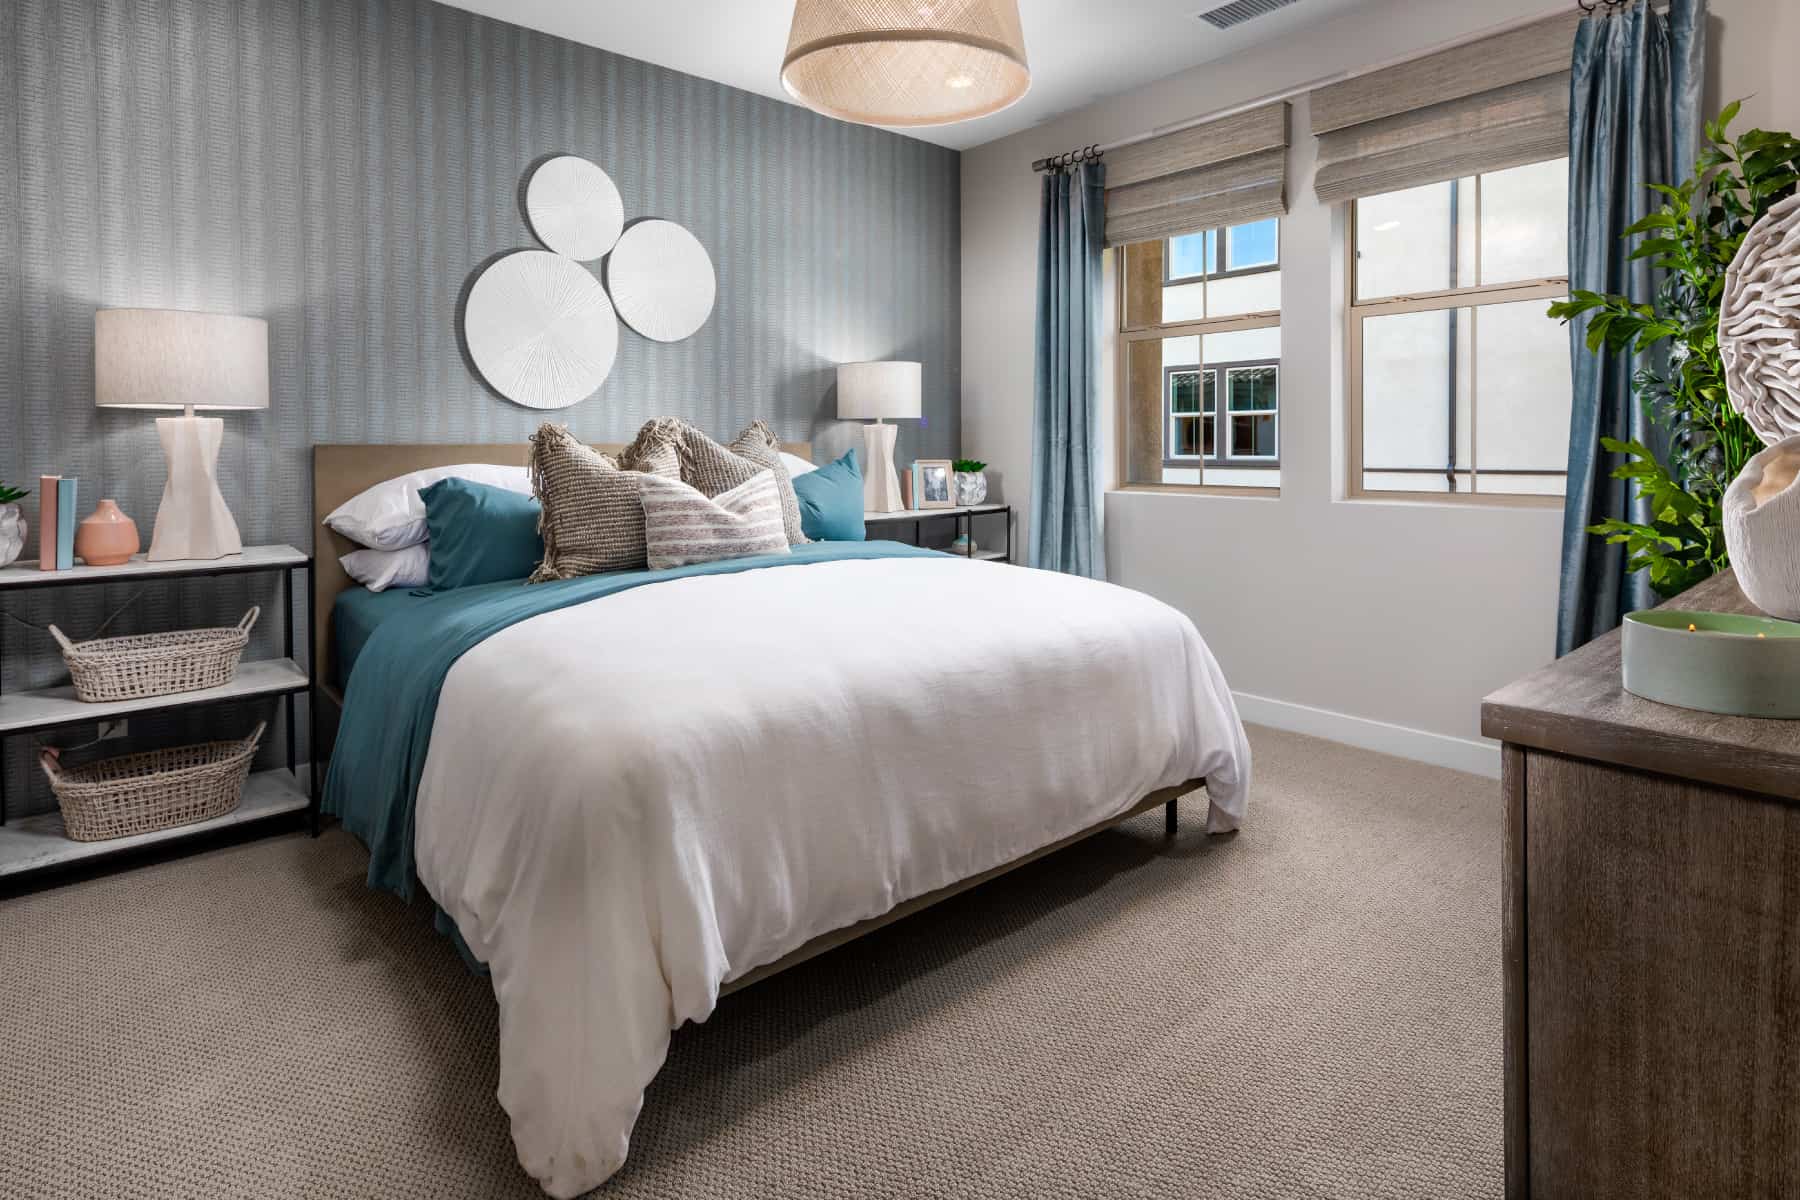 Primary Bedroom at Plan 1 of Belmont by Melia Homes in Cypress, CA